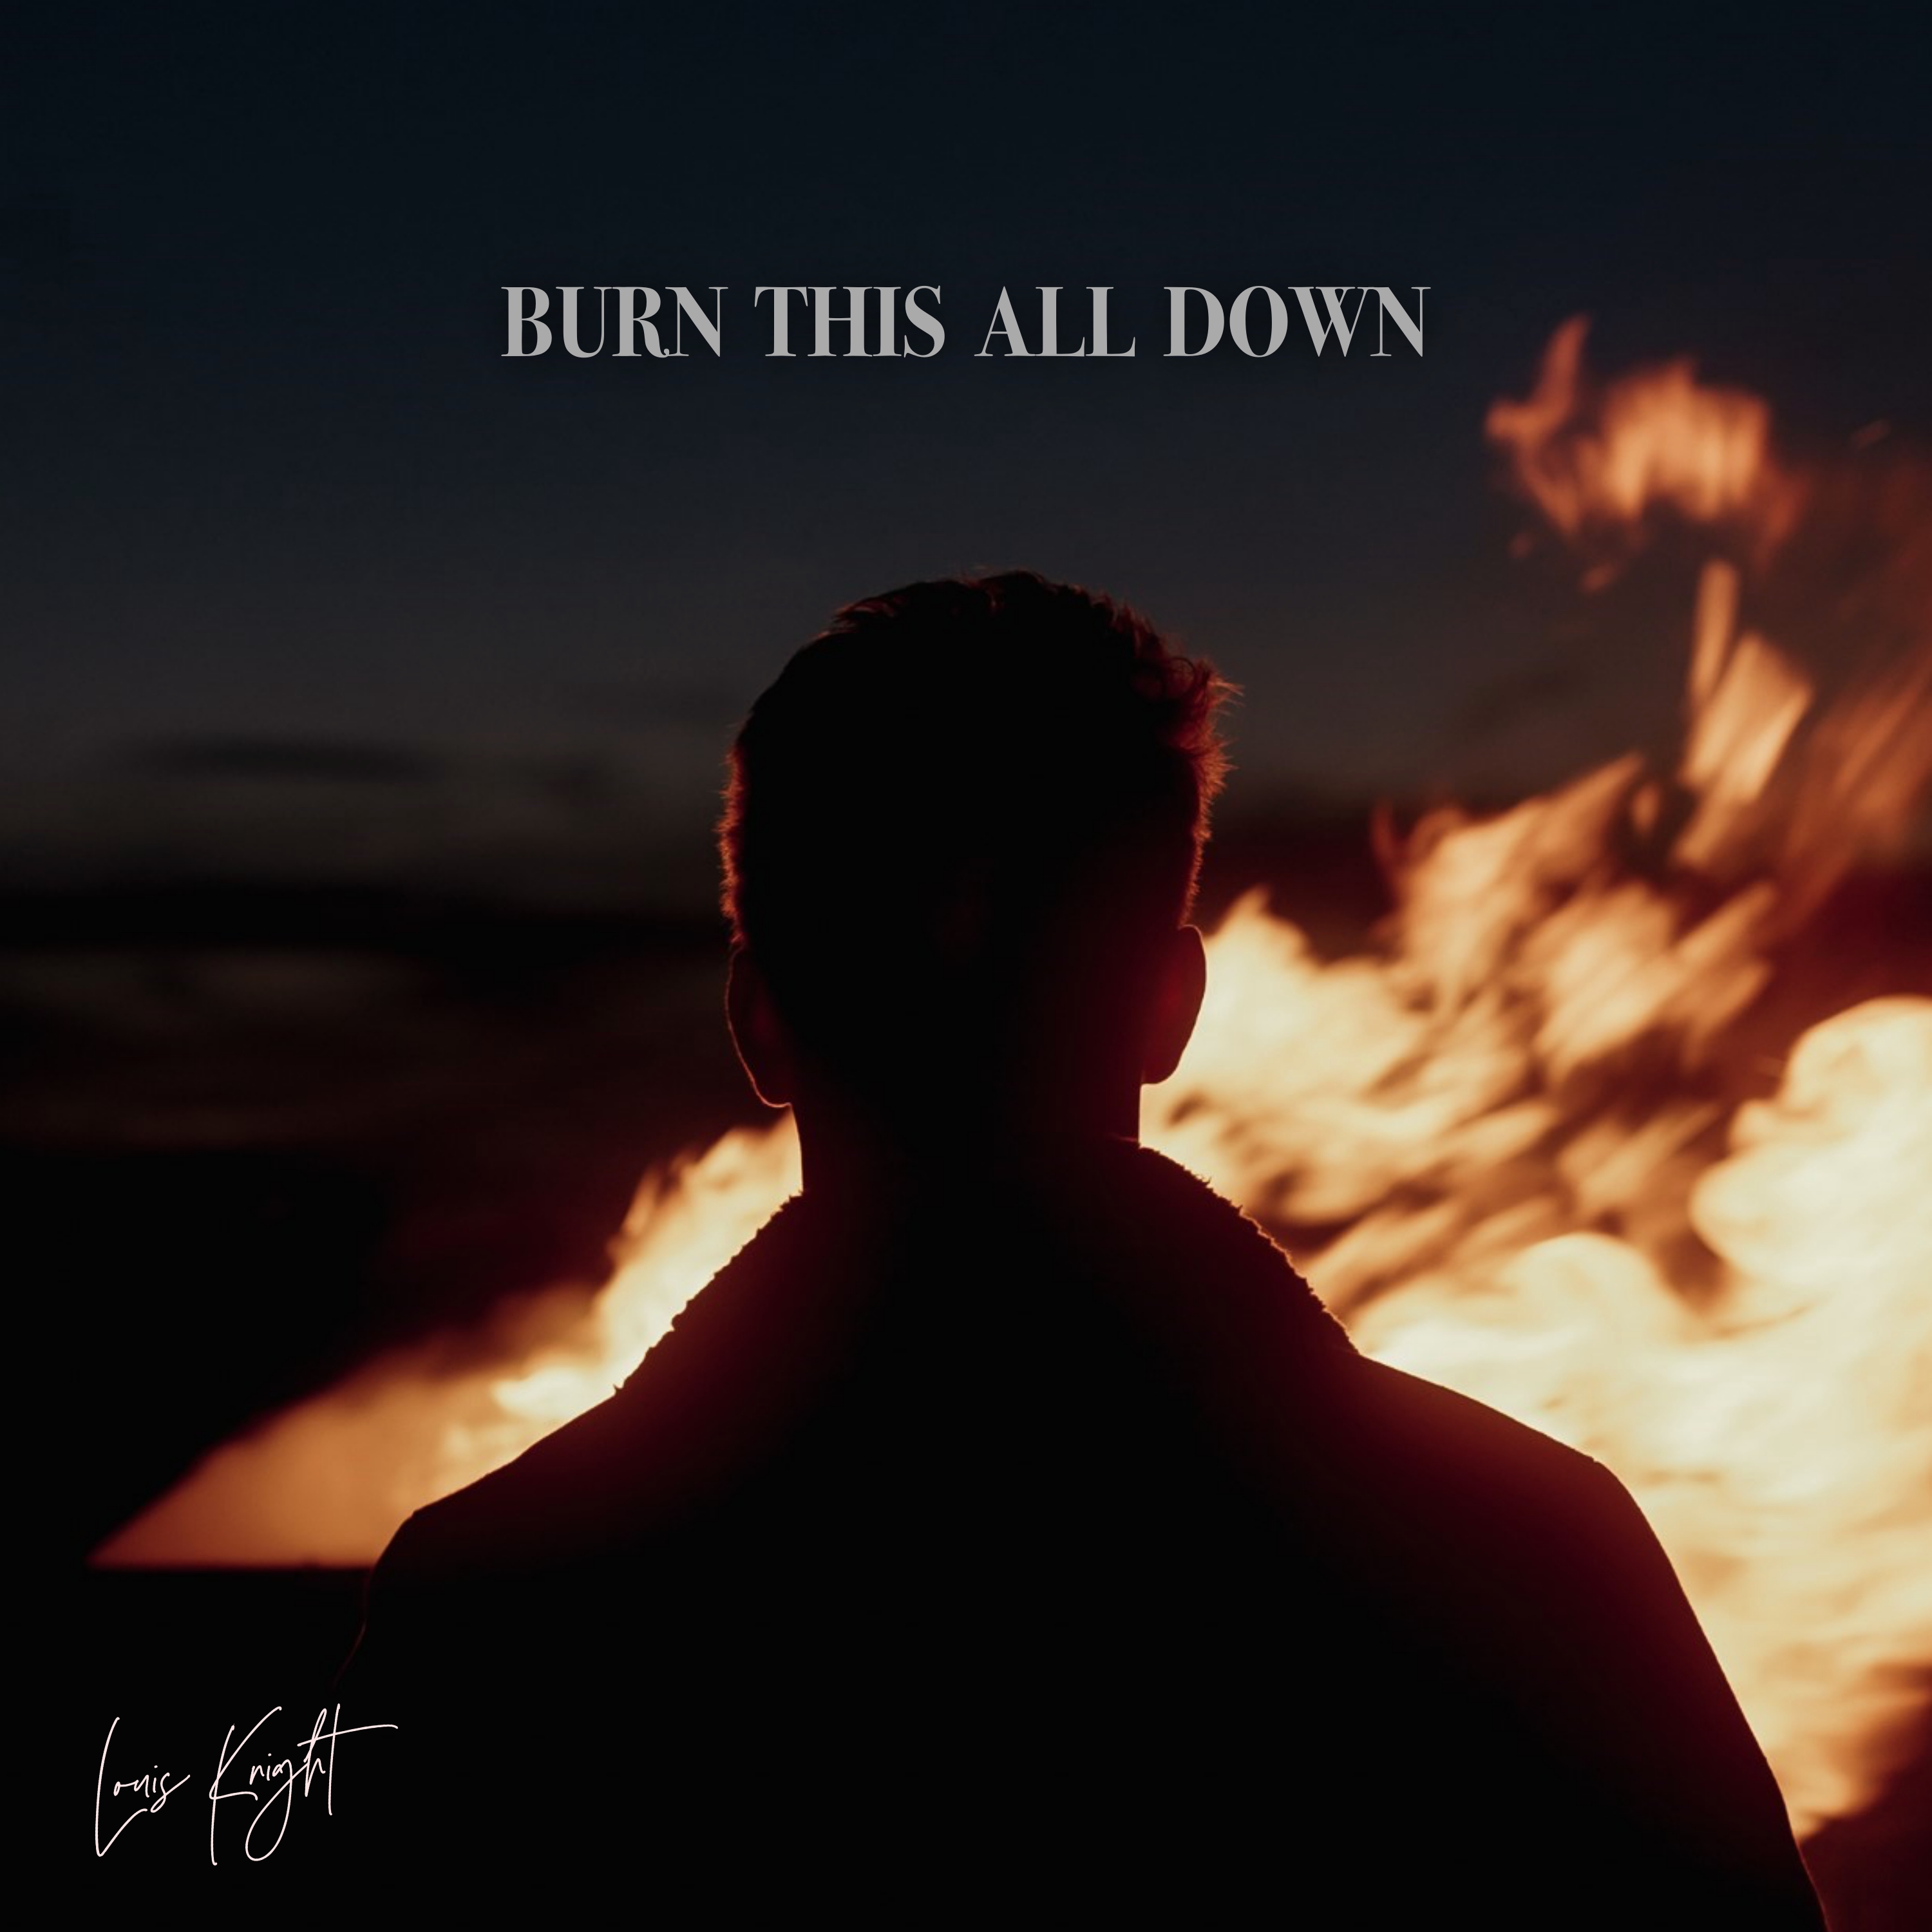 Artist Louis Knight Brings The Heat In New Single And Music Video”Burn This All Down”